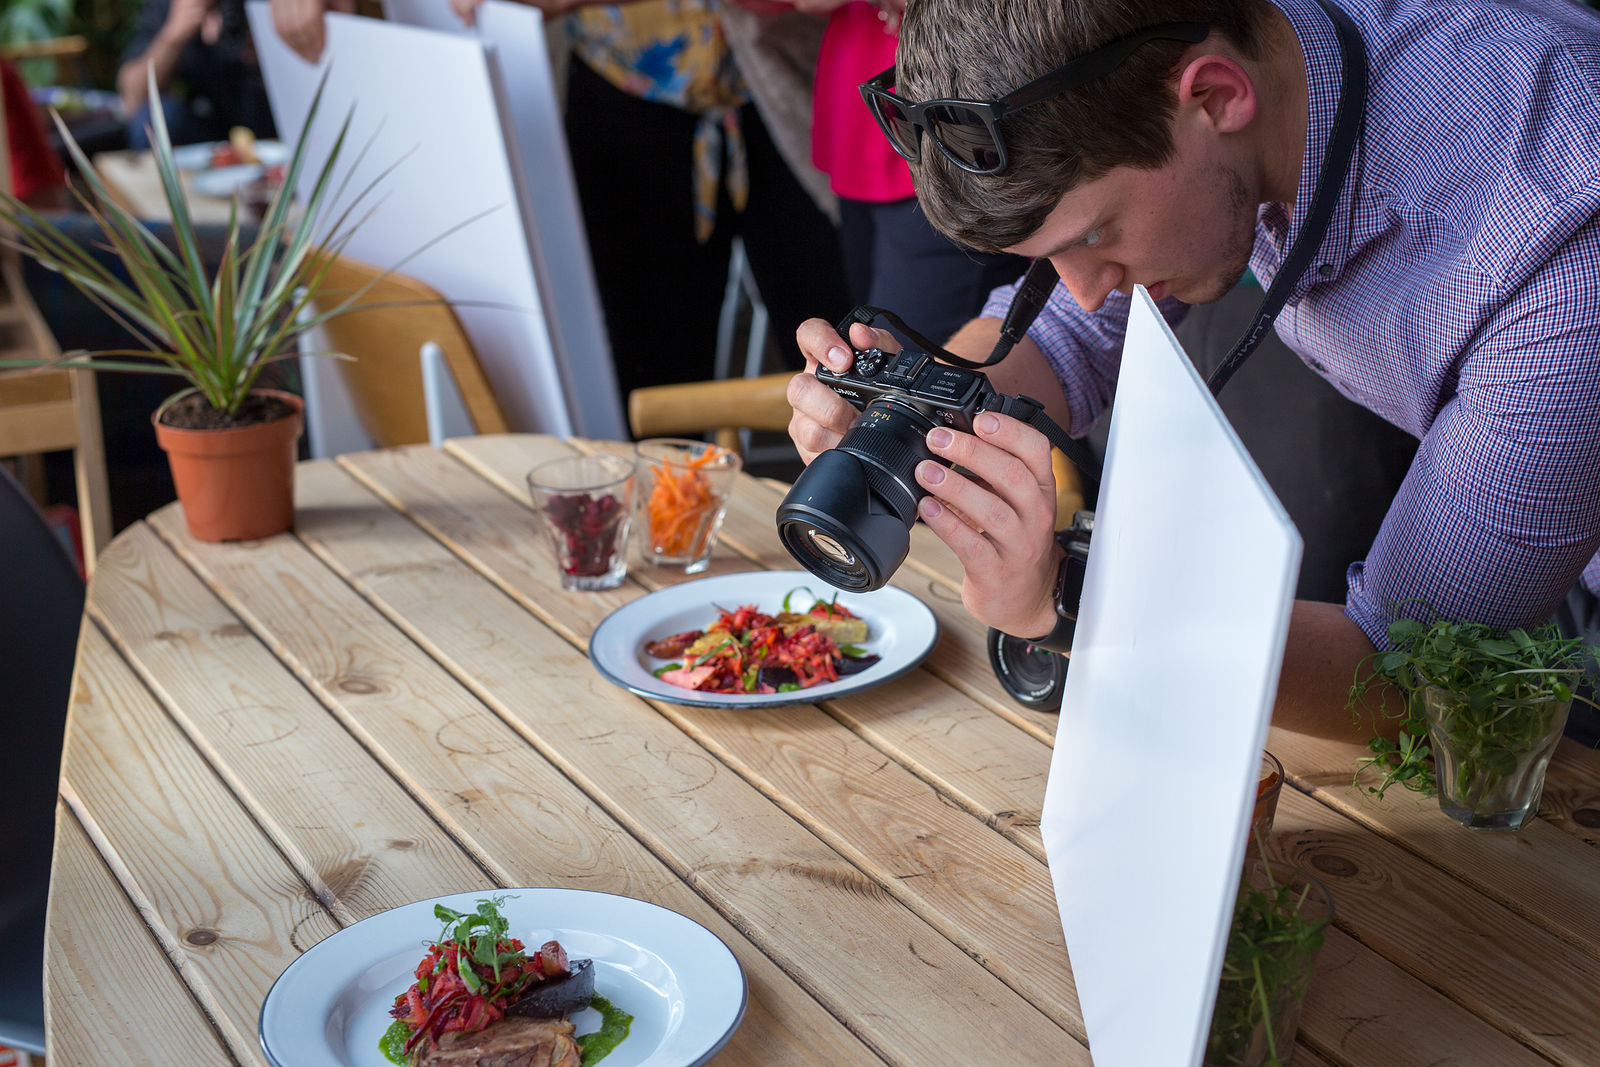 Plating, Styling, Photographing and Feasting.